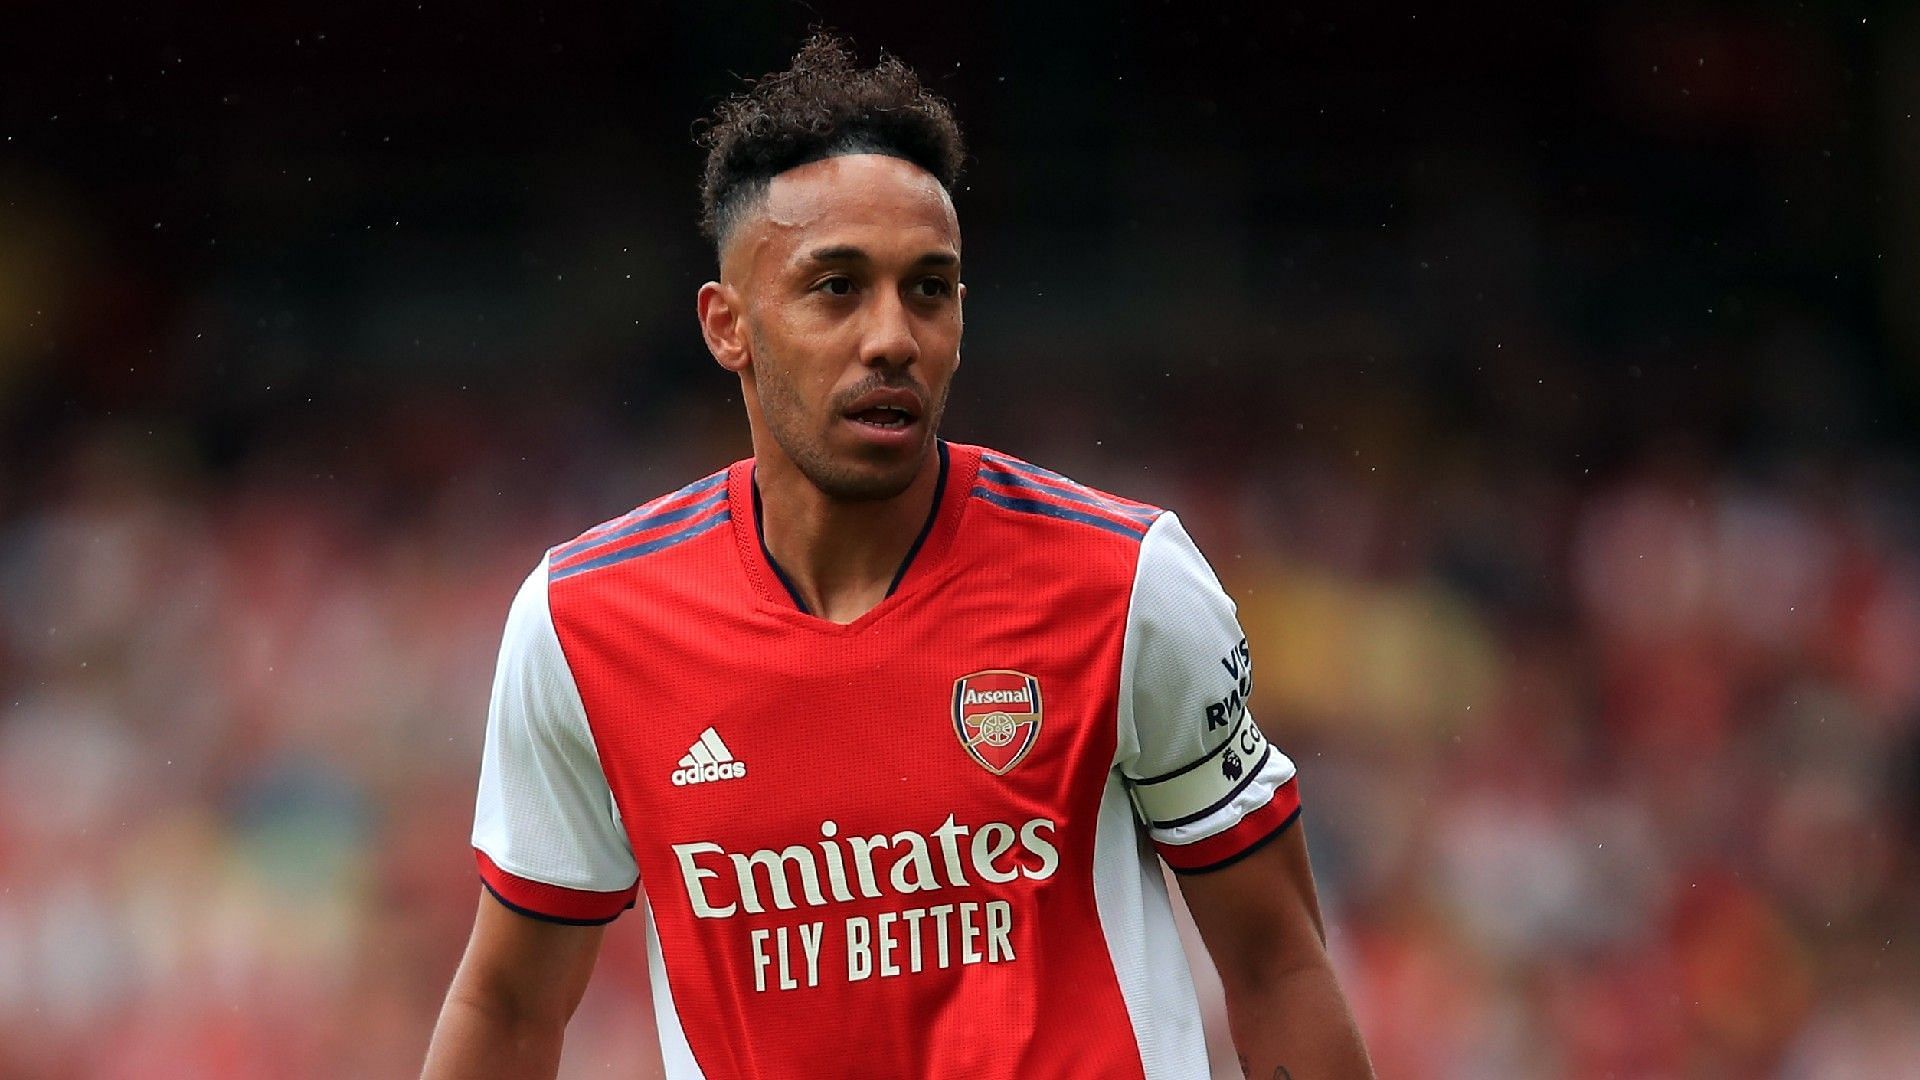 Pierre-Emerick Aubameyang has been disappointing on and off the field this season.